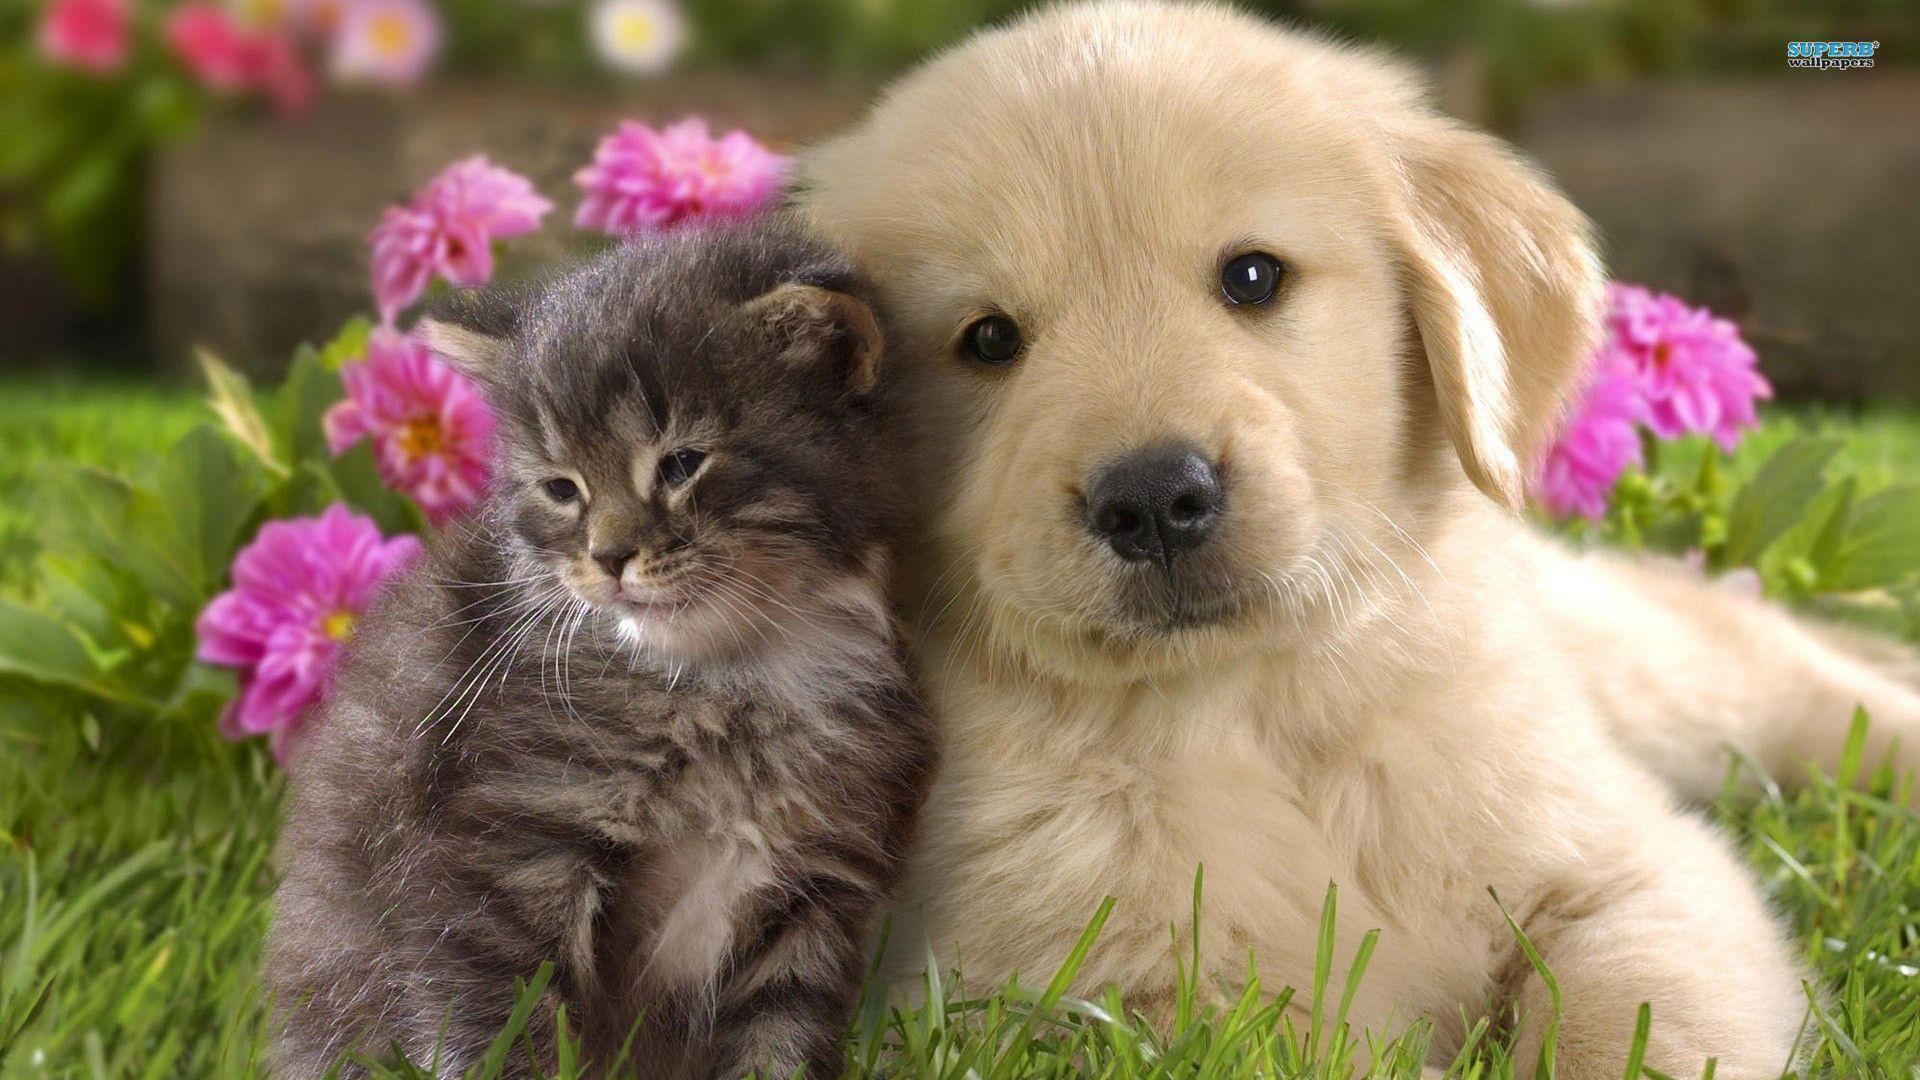 Labrador puppy and kitten wallpapers 1920x1080